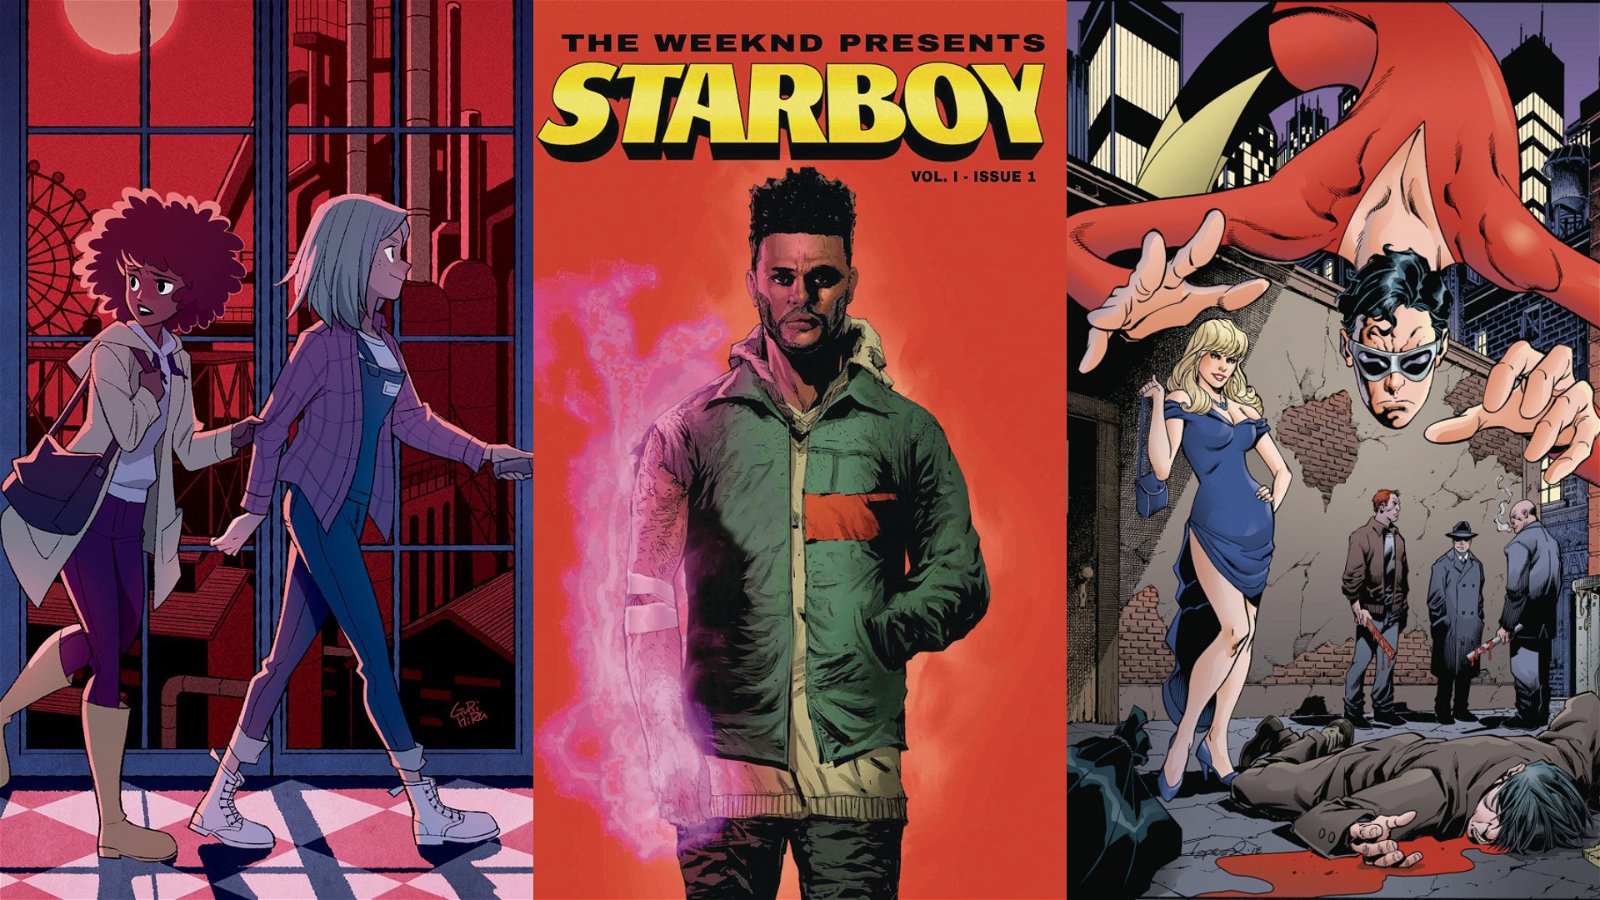 Best Comics to Buy This Week: The WEEKND Shines in Starboy #1 1